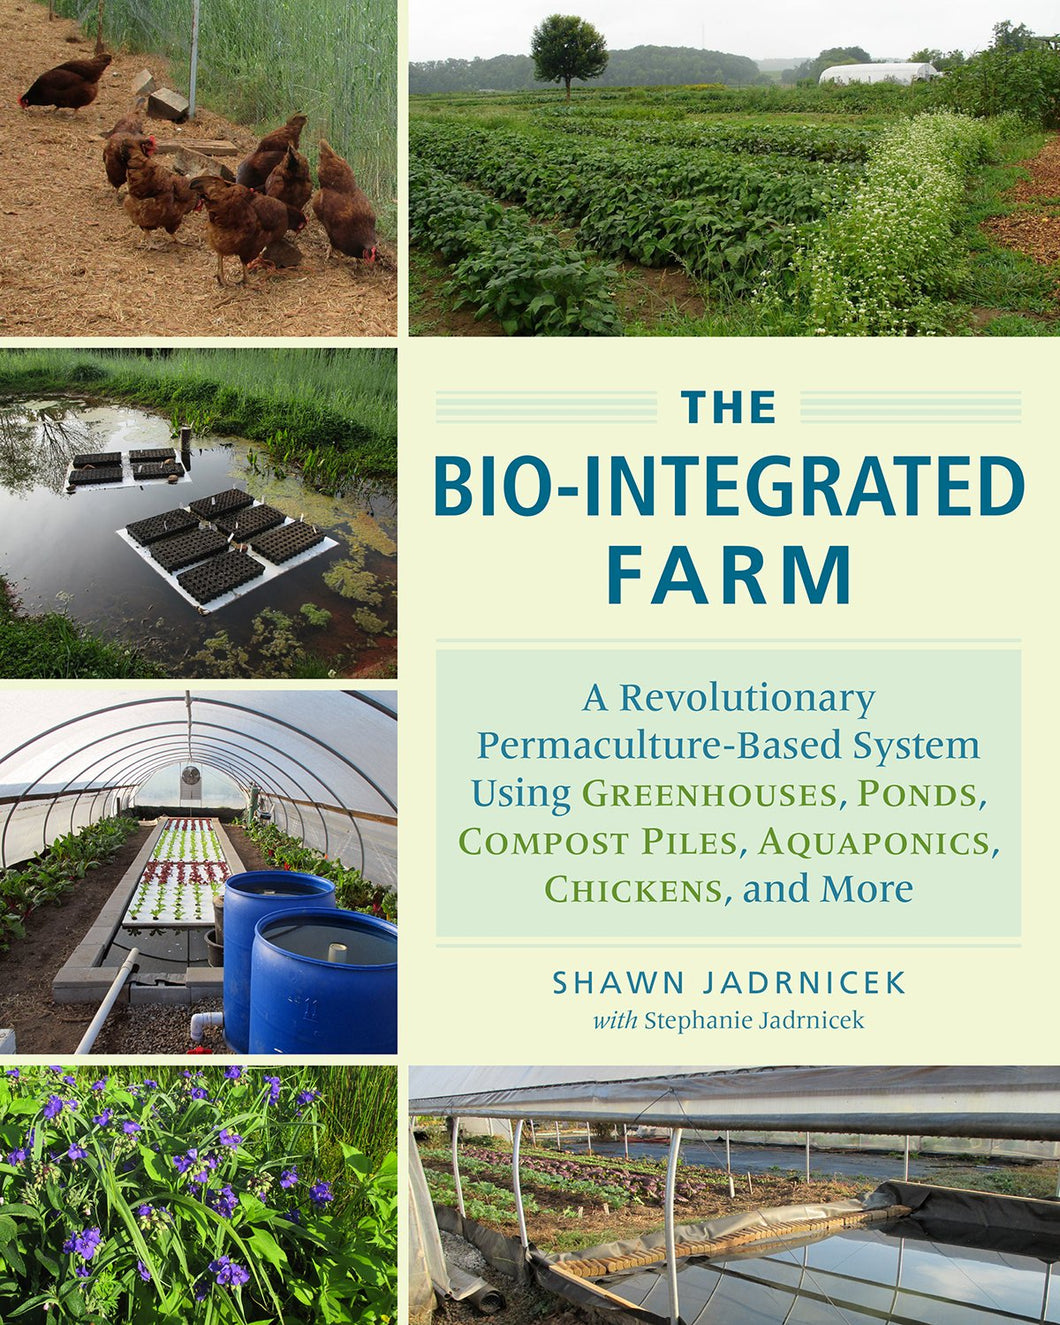 The Bio-Integrated Farm: A Revolutionary Permaculture-Based System Using Greenhouses, Ponds, Compost Piles, Aquaponics, Chickens, and More